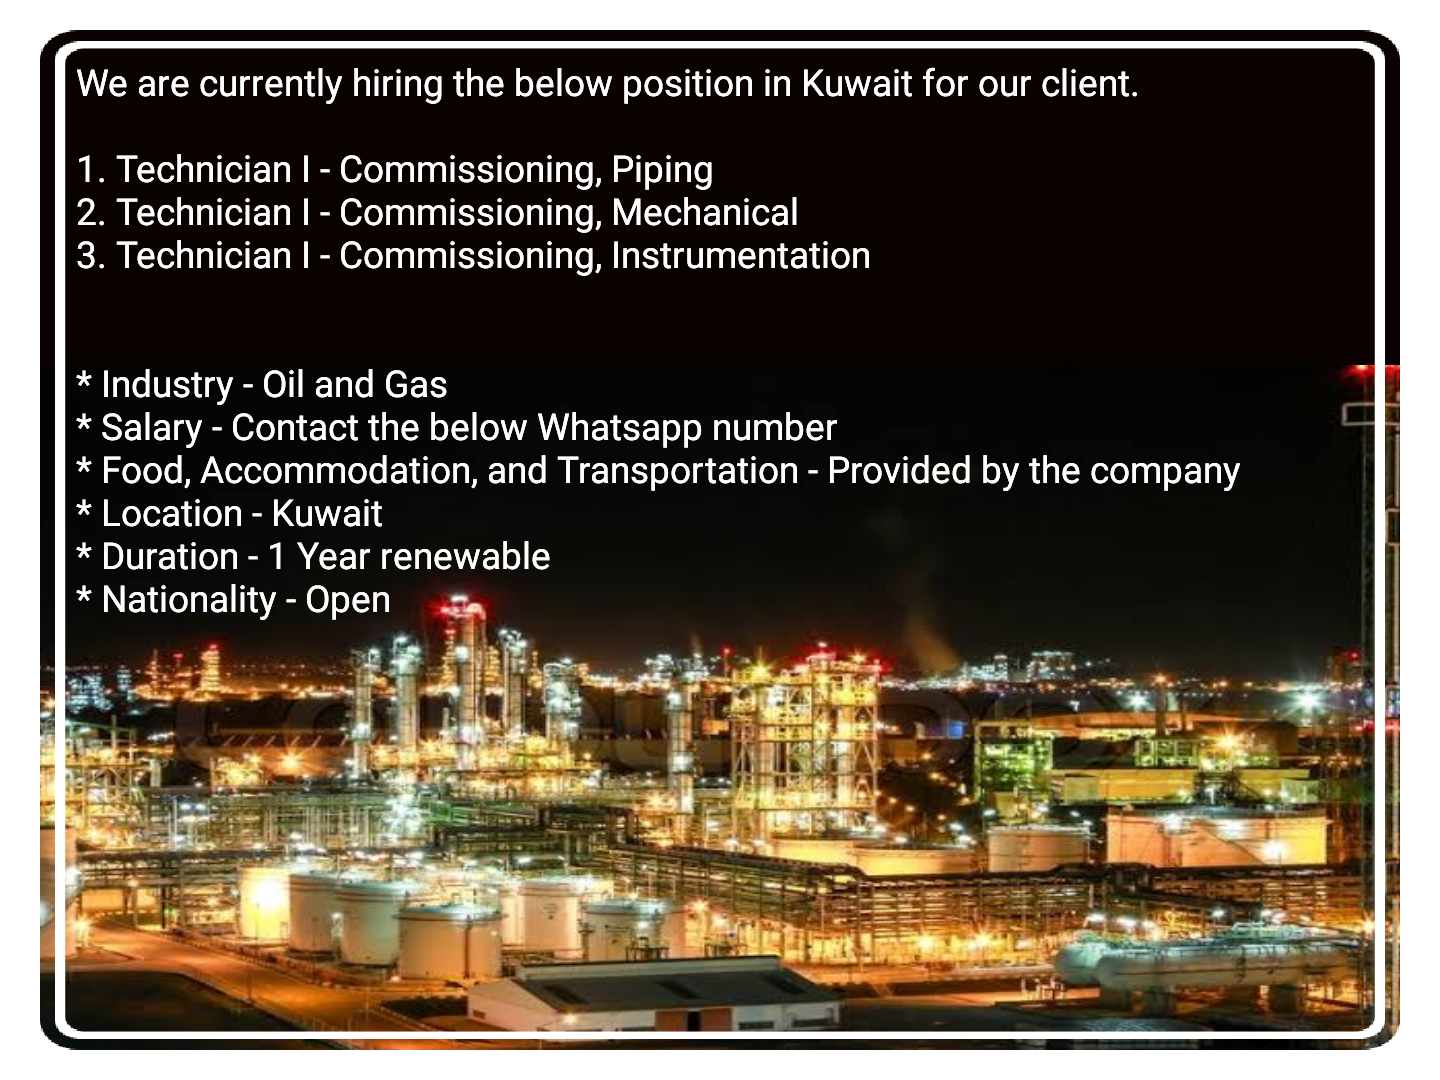 Technician Commissioning Piping, Mechanical & Instrumentation Jobs